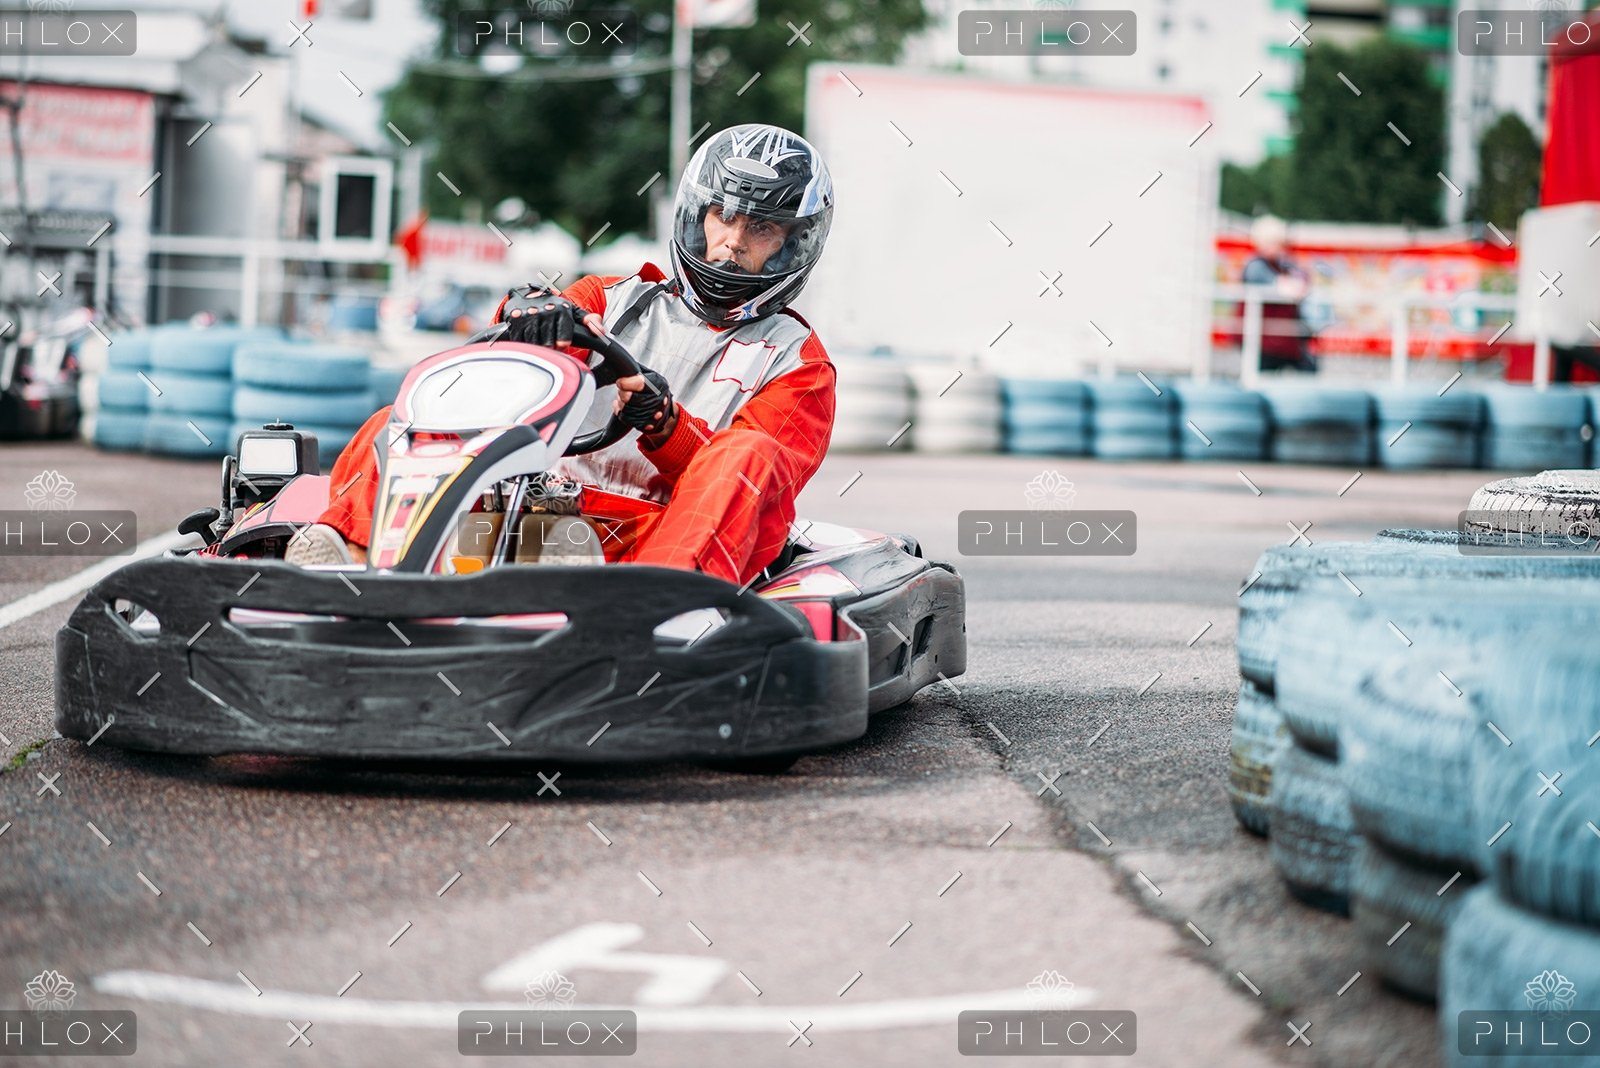 demo-attachment-10-karting-racer-in-action-go-kart-competition-P3QUDEW